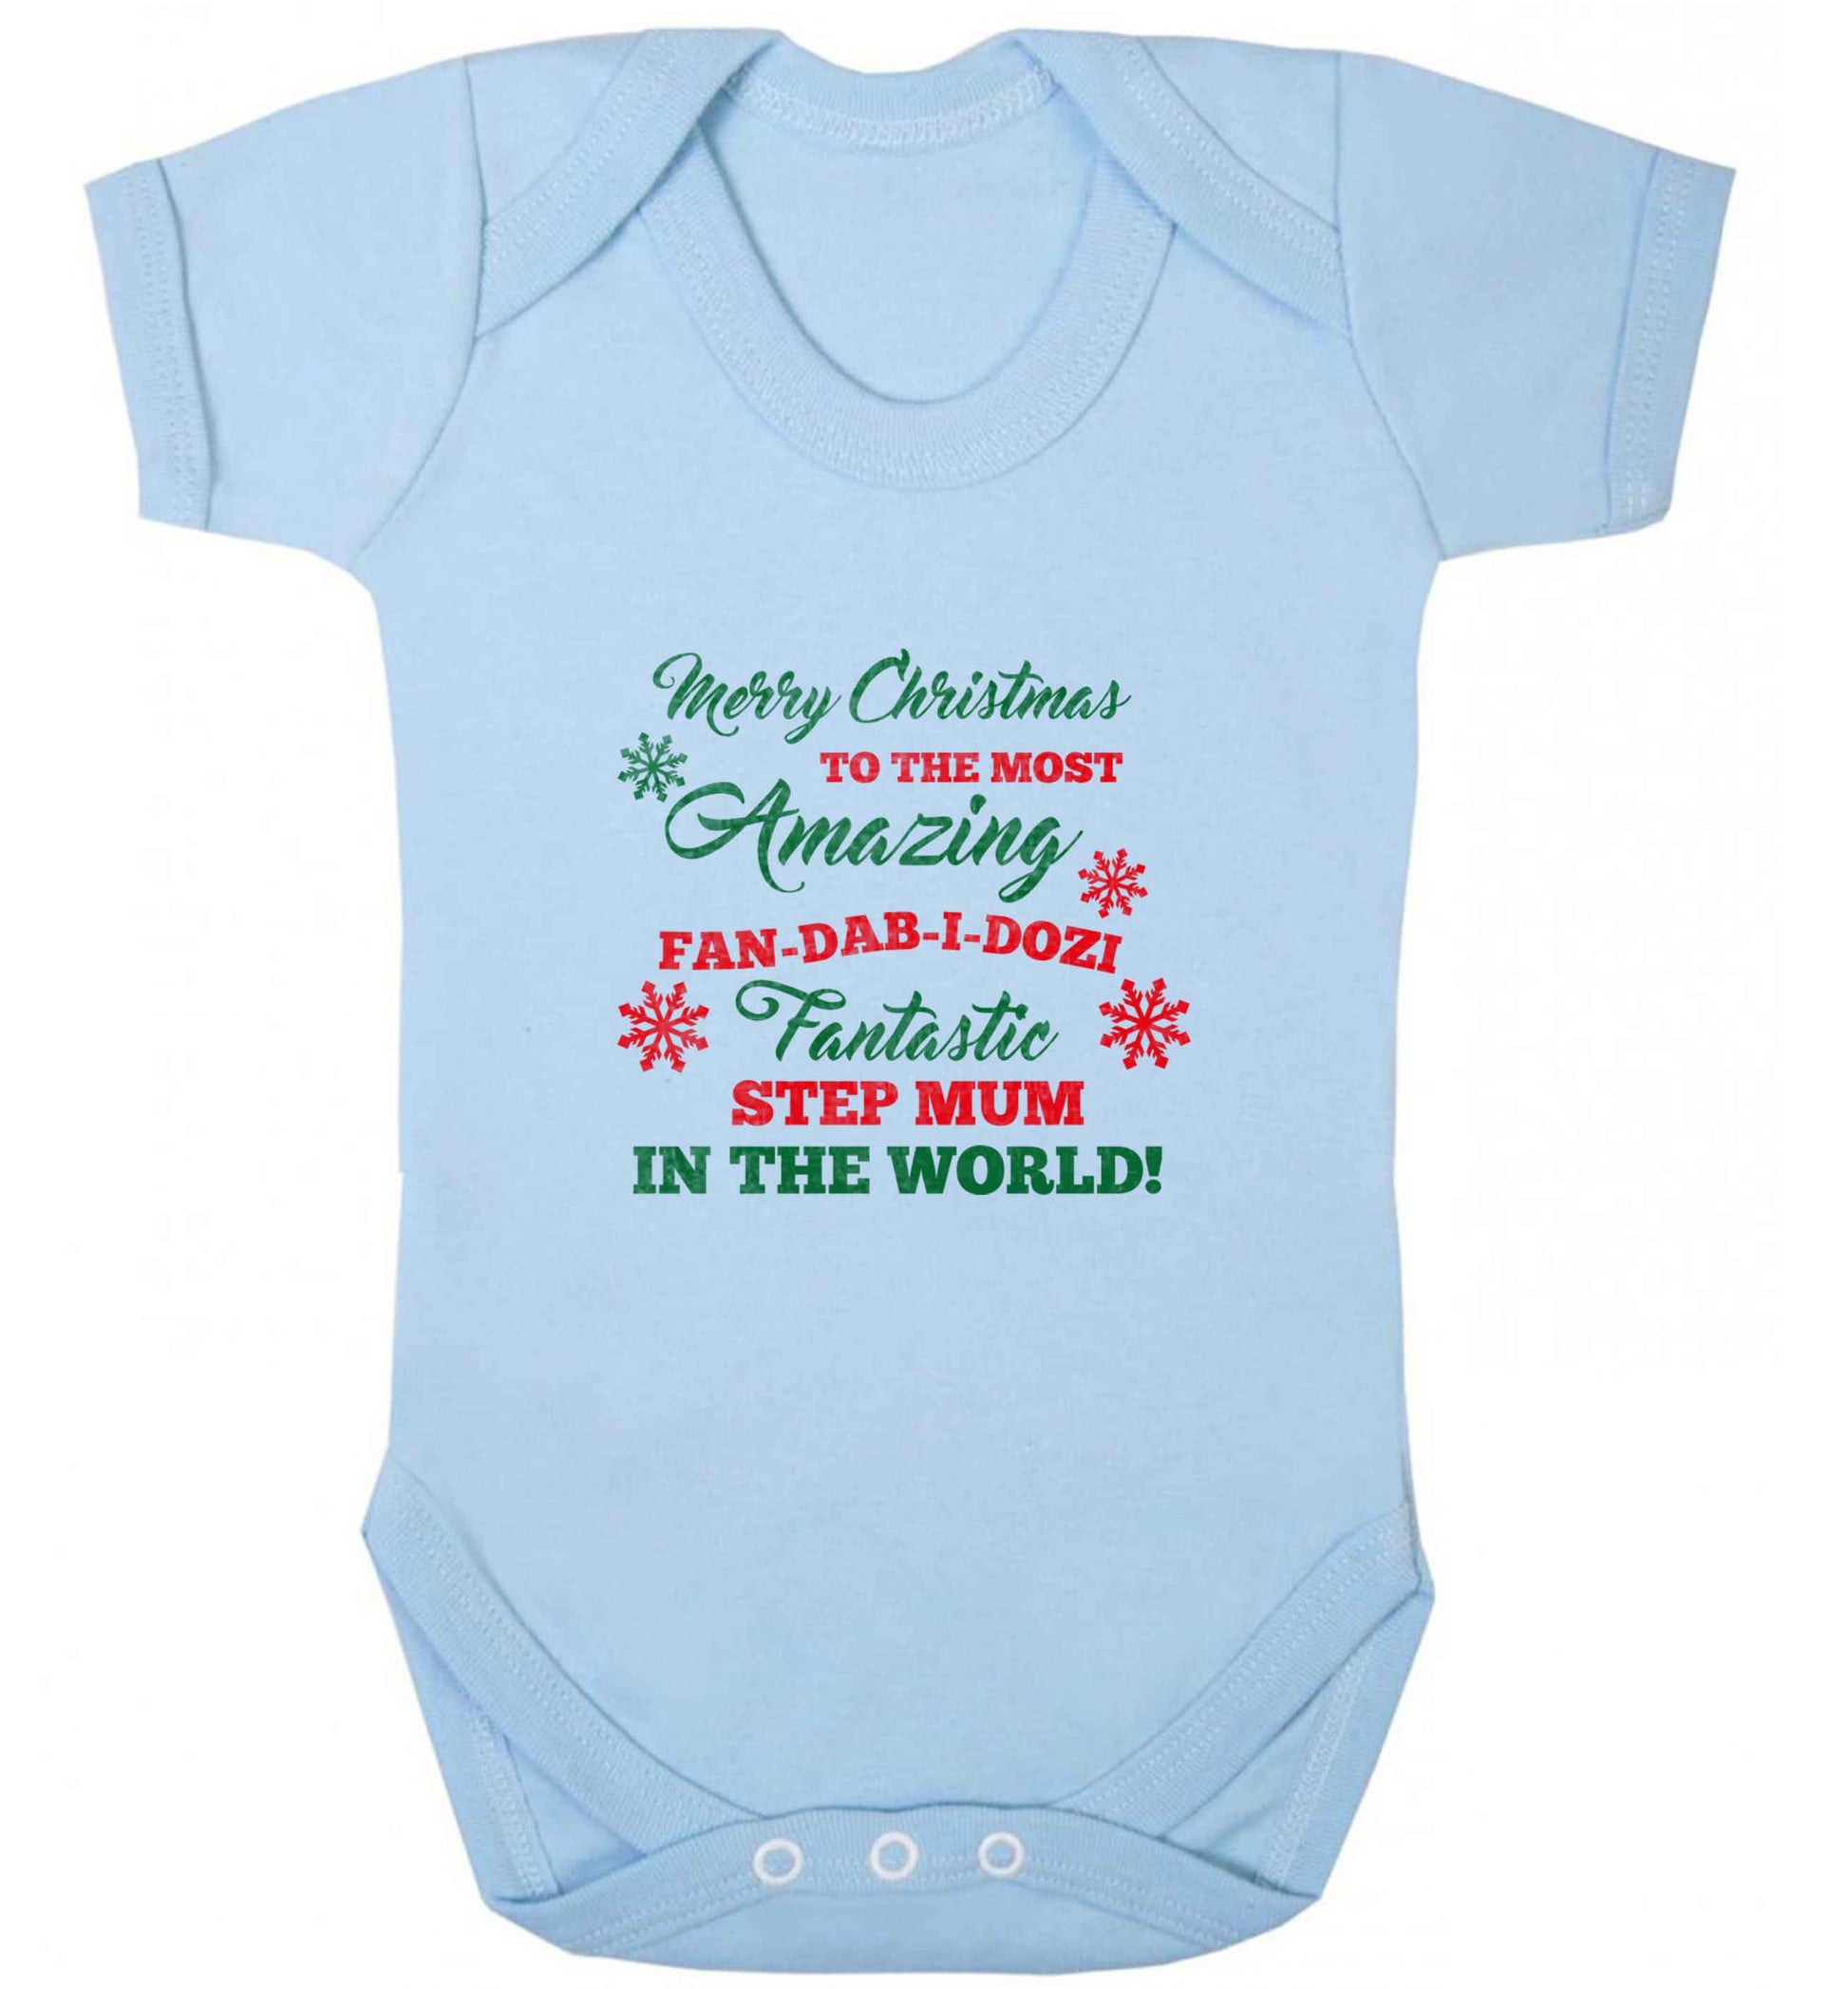 Merry Christmas to the most amazing fan-dab-i-dozi fantasic Step Mum in the world baby vest pale blue 18-24 months